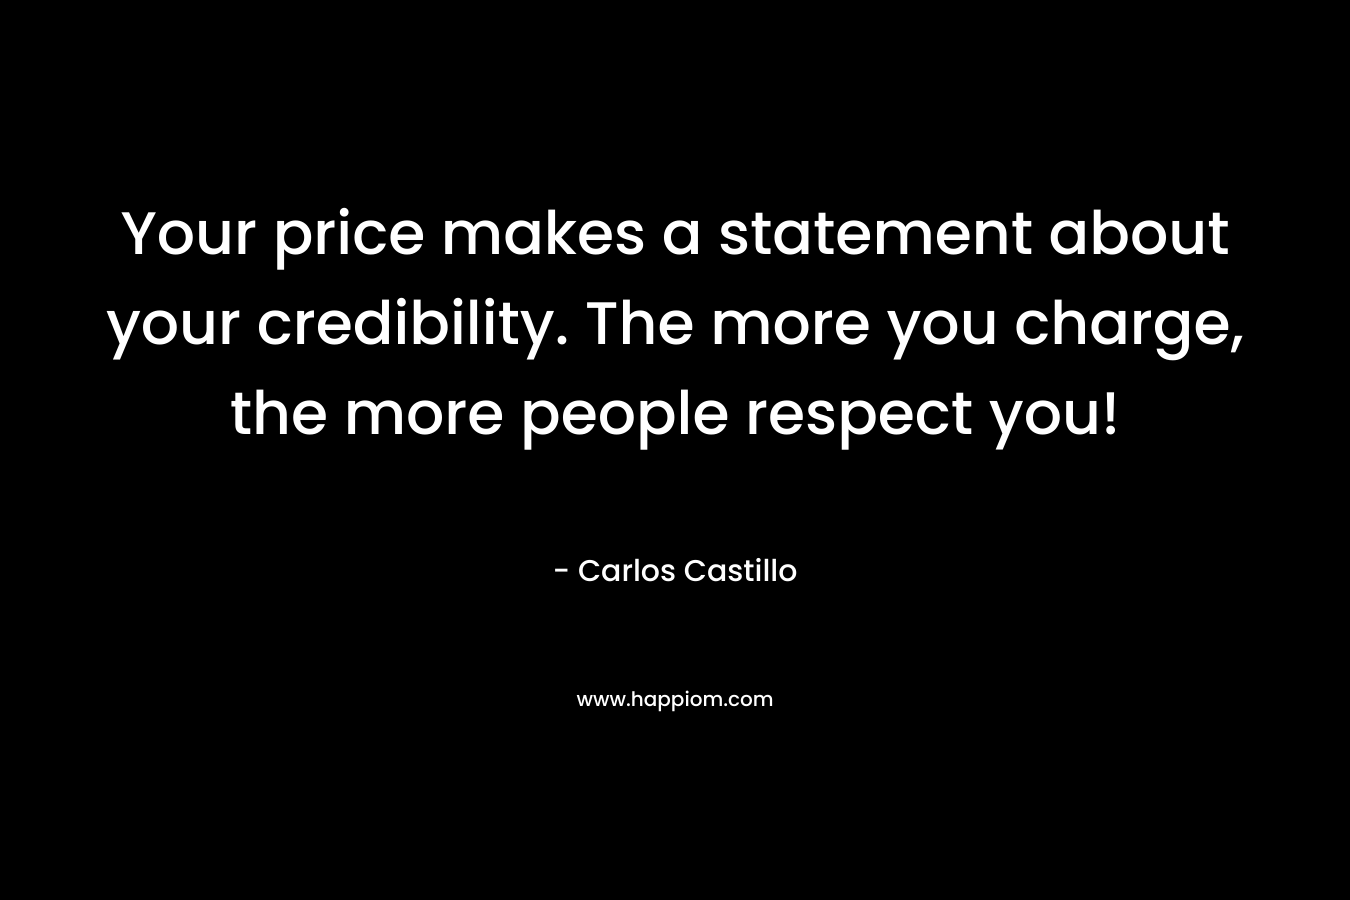 Your price makes a statement about your credibility. The more you charge, the more people respect you! – Carlos Castillo